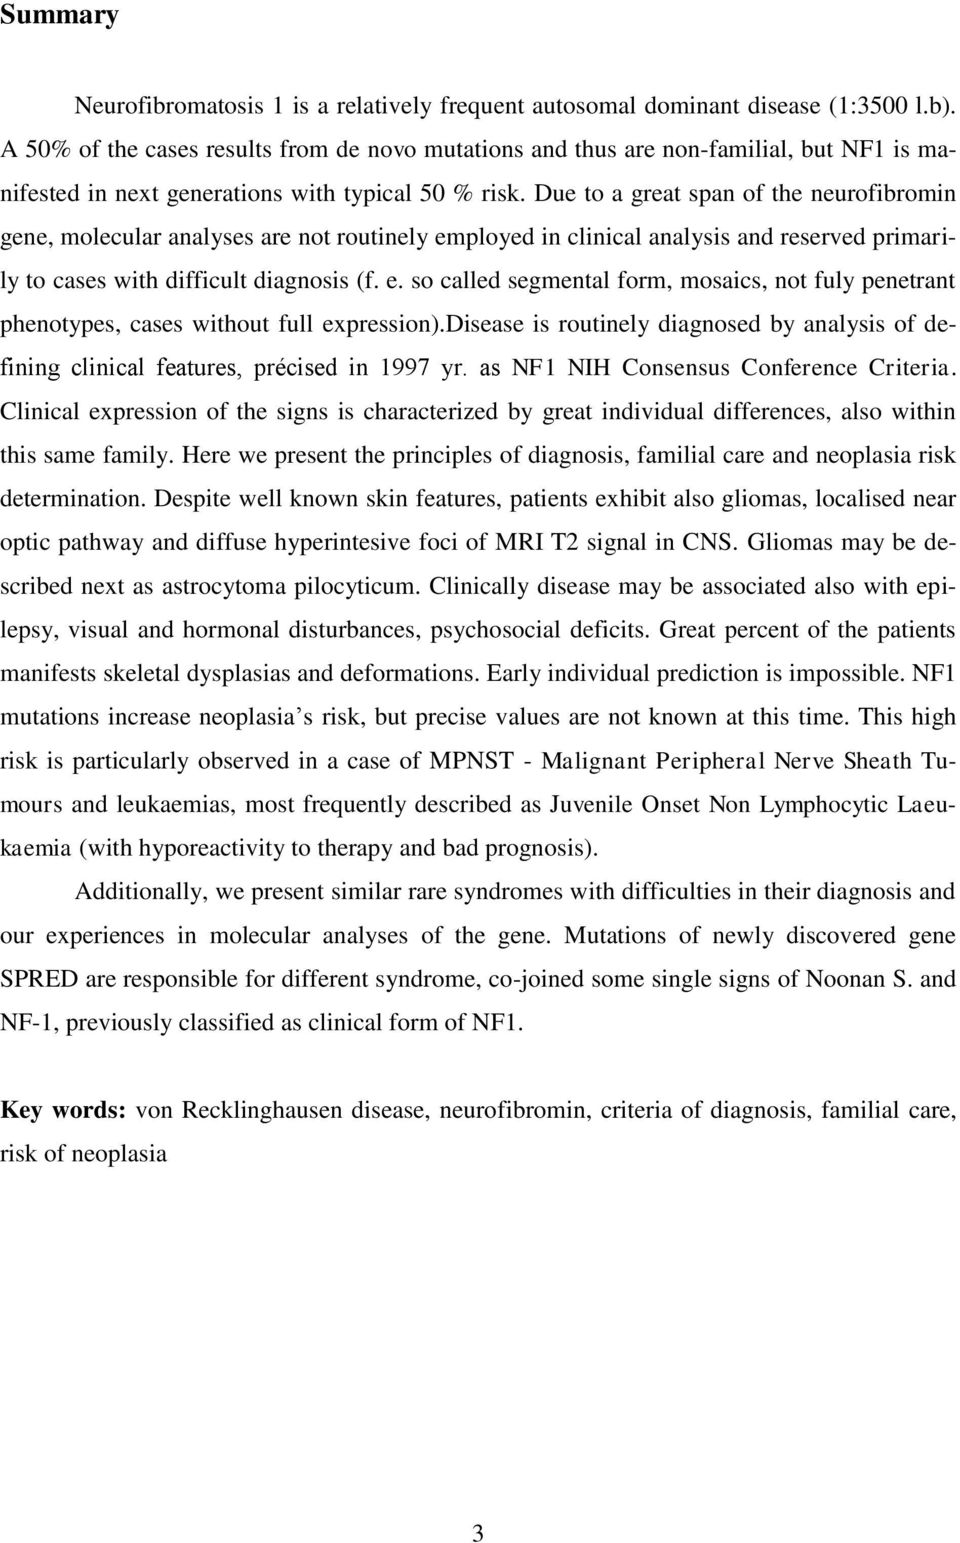 Due to a great span of the neurofibromin gene, molecular analyses are not routinely employed in clinical analysis and reserved primarily to cases with difficult diagnosis (f. e. so called segmental form, mosaics, not fuly penetrant phenotypes, cases without full expression).